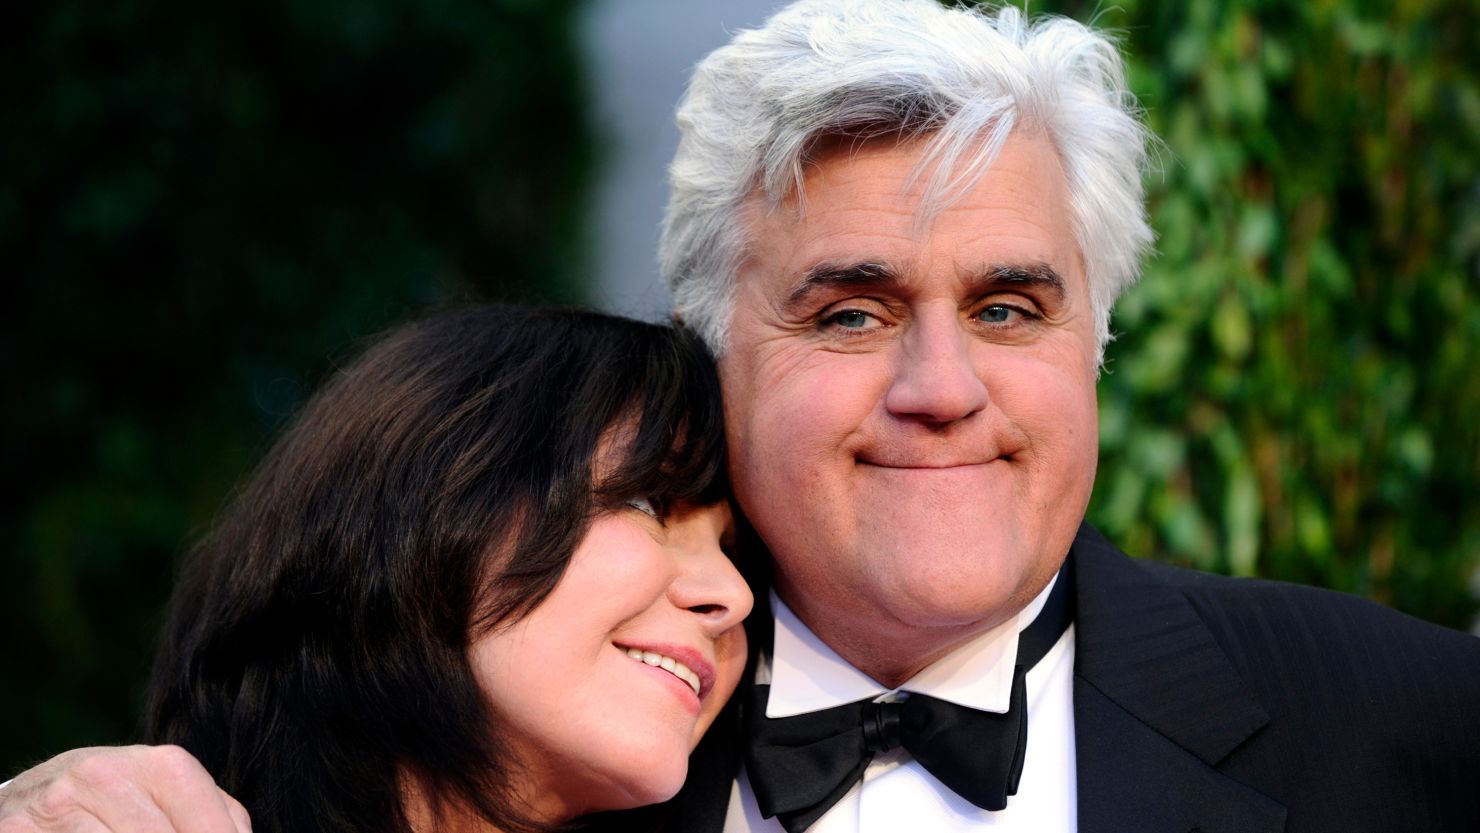 Mavis Leno and Jay Leno at the 2010 Vanity Fair Oscar after party in West Hollywood.